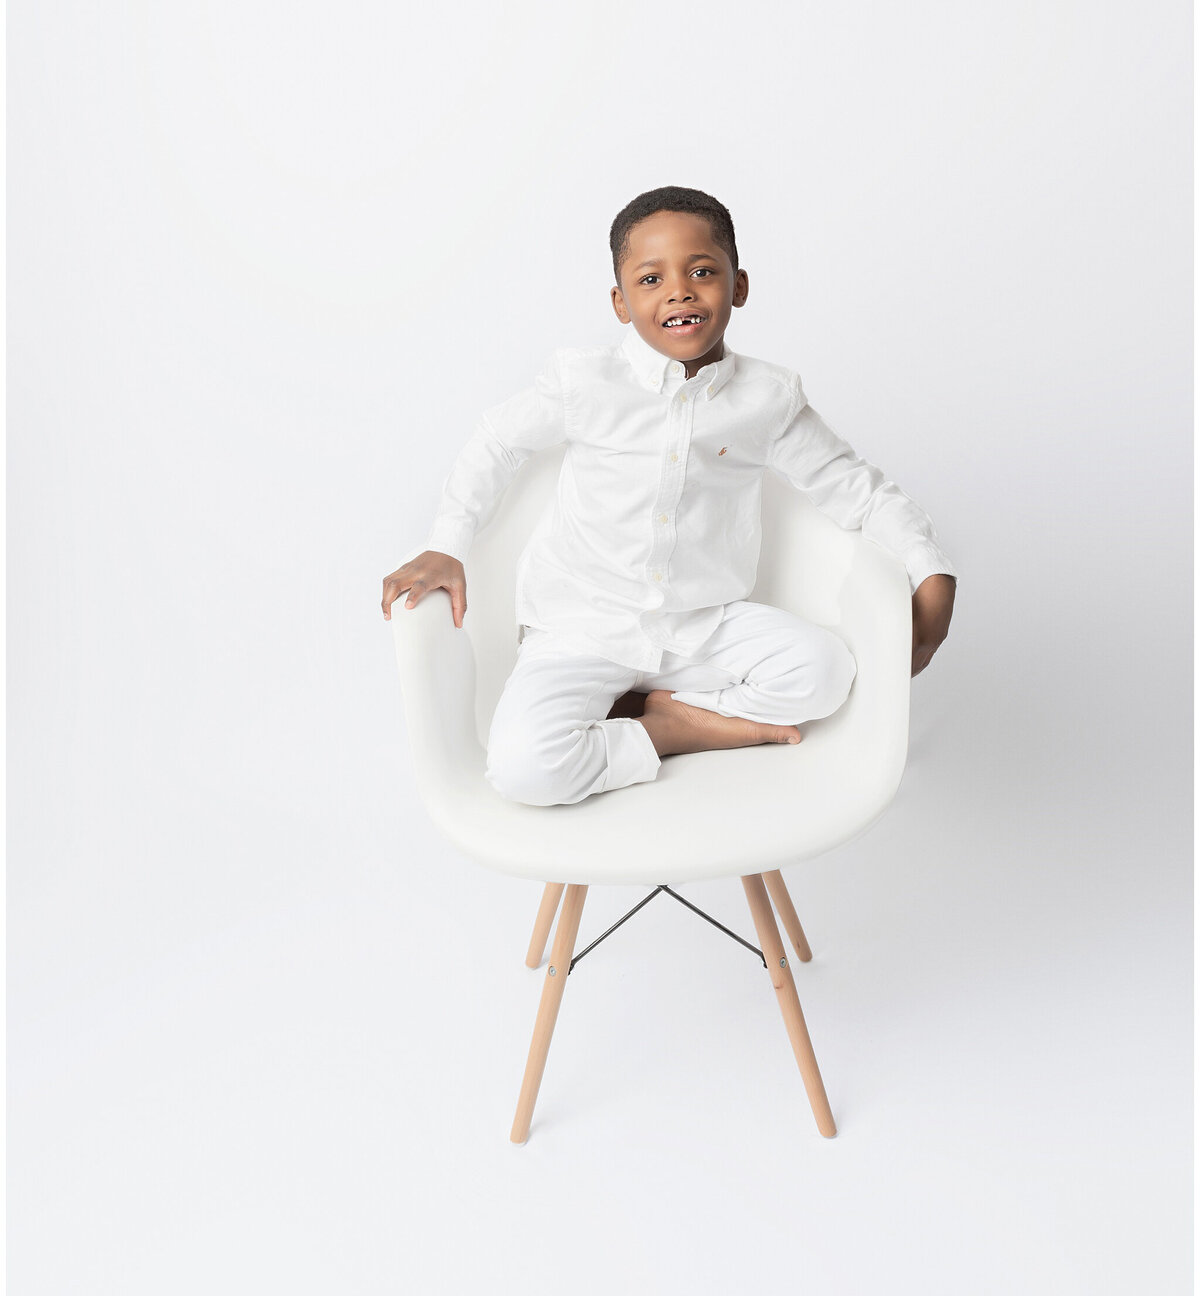 A boy sitting on a white chair  wearing a trendy outfit .